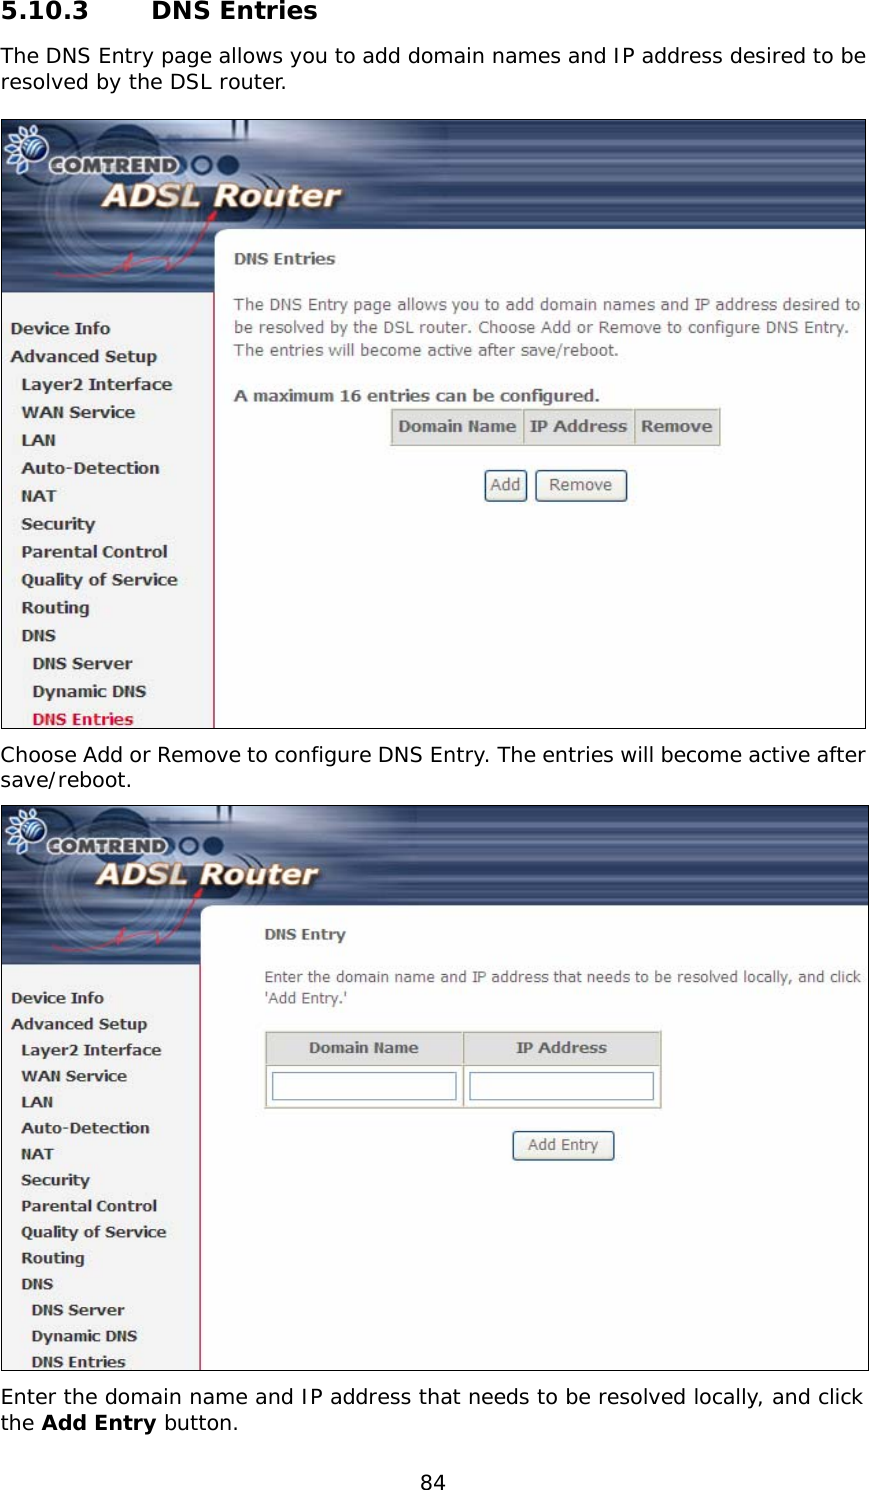  84 5.10.3   DNS Entries The DNS Entry page allows you to add domain names and IP address desired to be resolved by the DSL router.    Choose Add or Remove to configure DNS Entry. The entries will become active after save/reboot.  Enter the domain name and IP address that needs to be resolved locally, and click the Add Entry button.  